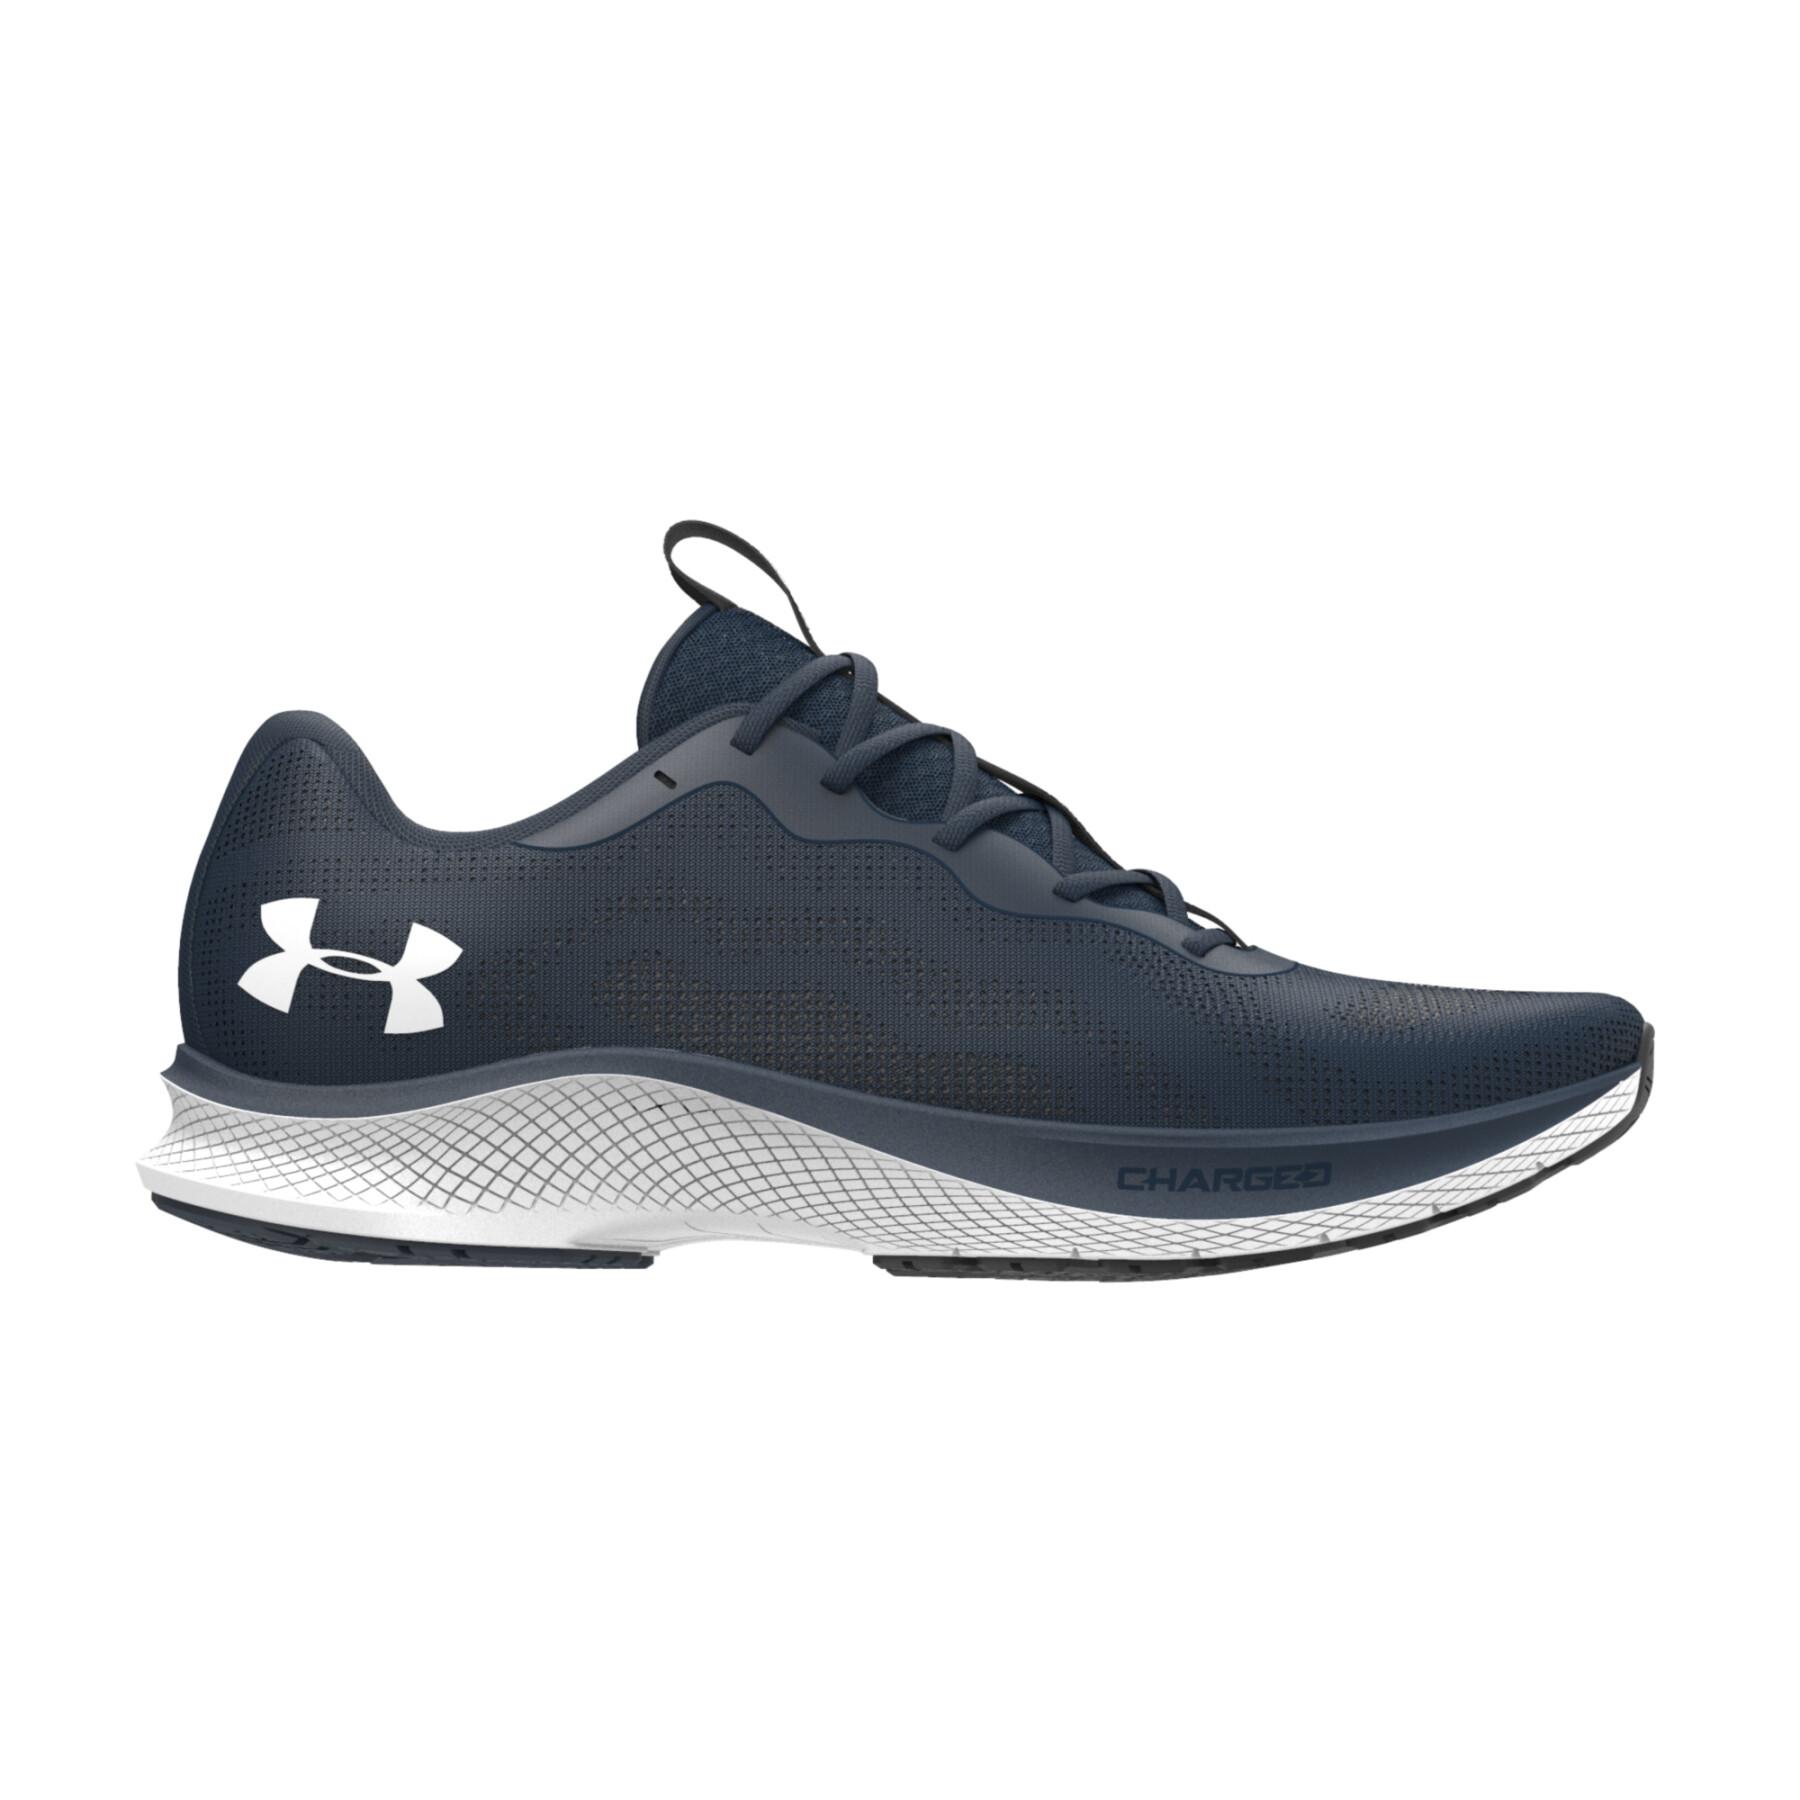 Running shoes Under Armour Charged Bandit 7